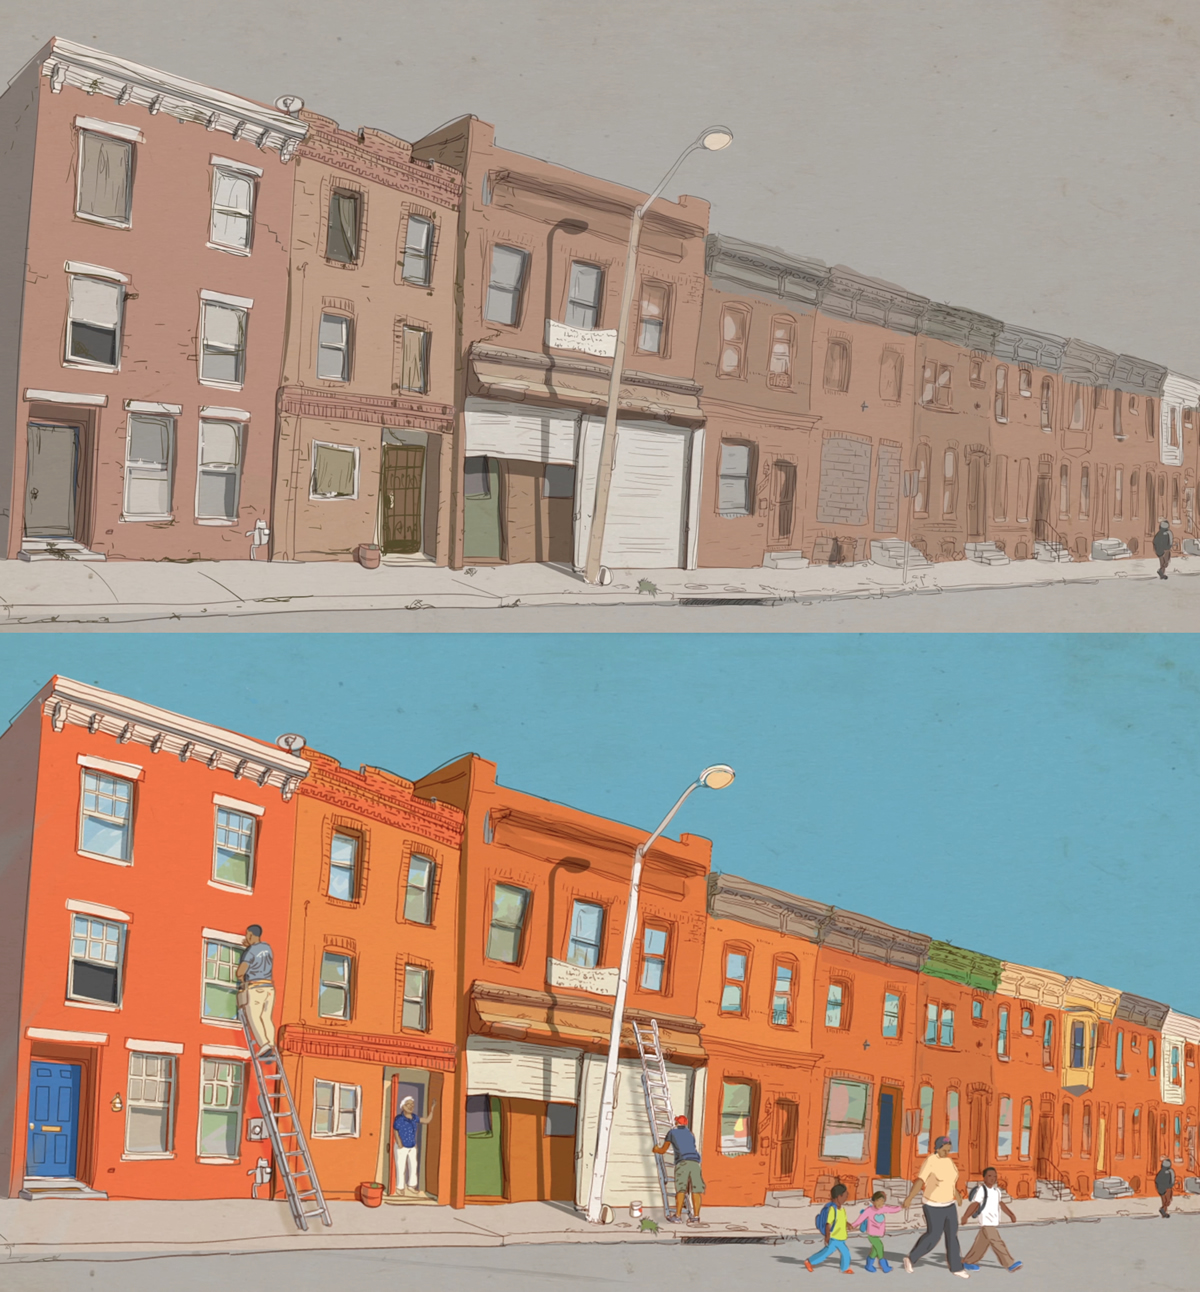 Before & after illustrations of neighborhoods transformed by Cecily Anderson of Anagram for Healthy Rowhouse Project by Barra Foundation (@BarraFdn)